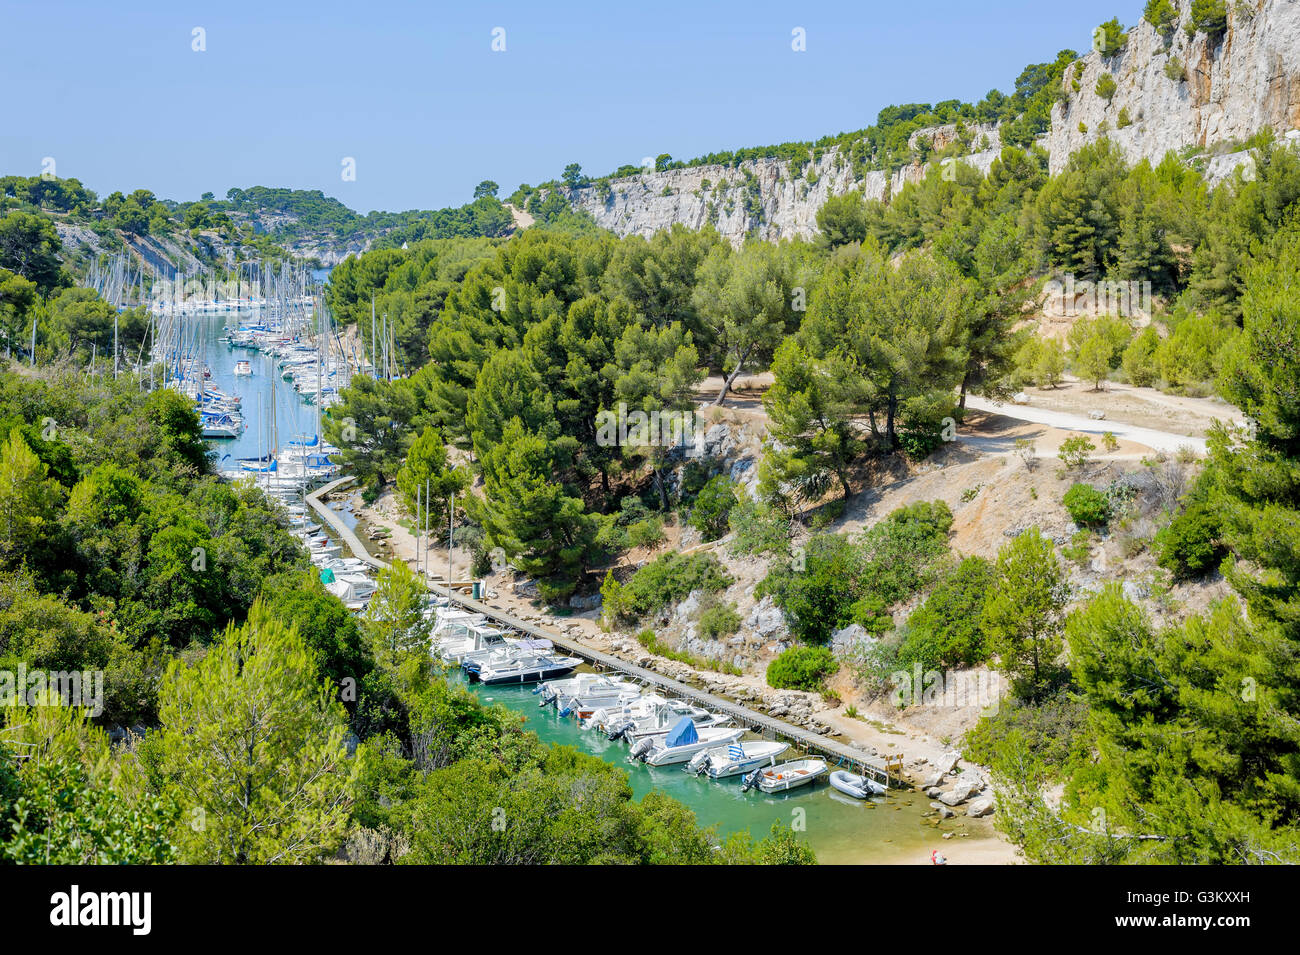 Calanque of Port-Miou, Cassis, France Stock Photo - Alamy